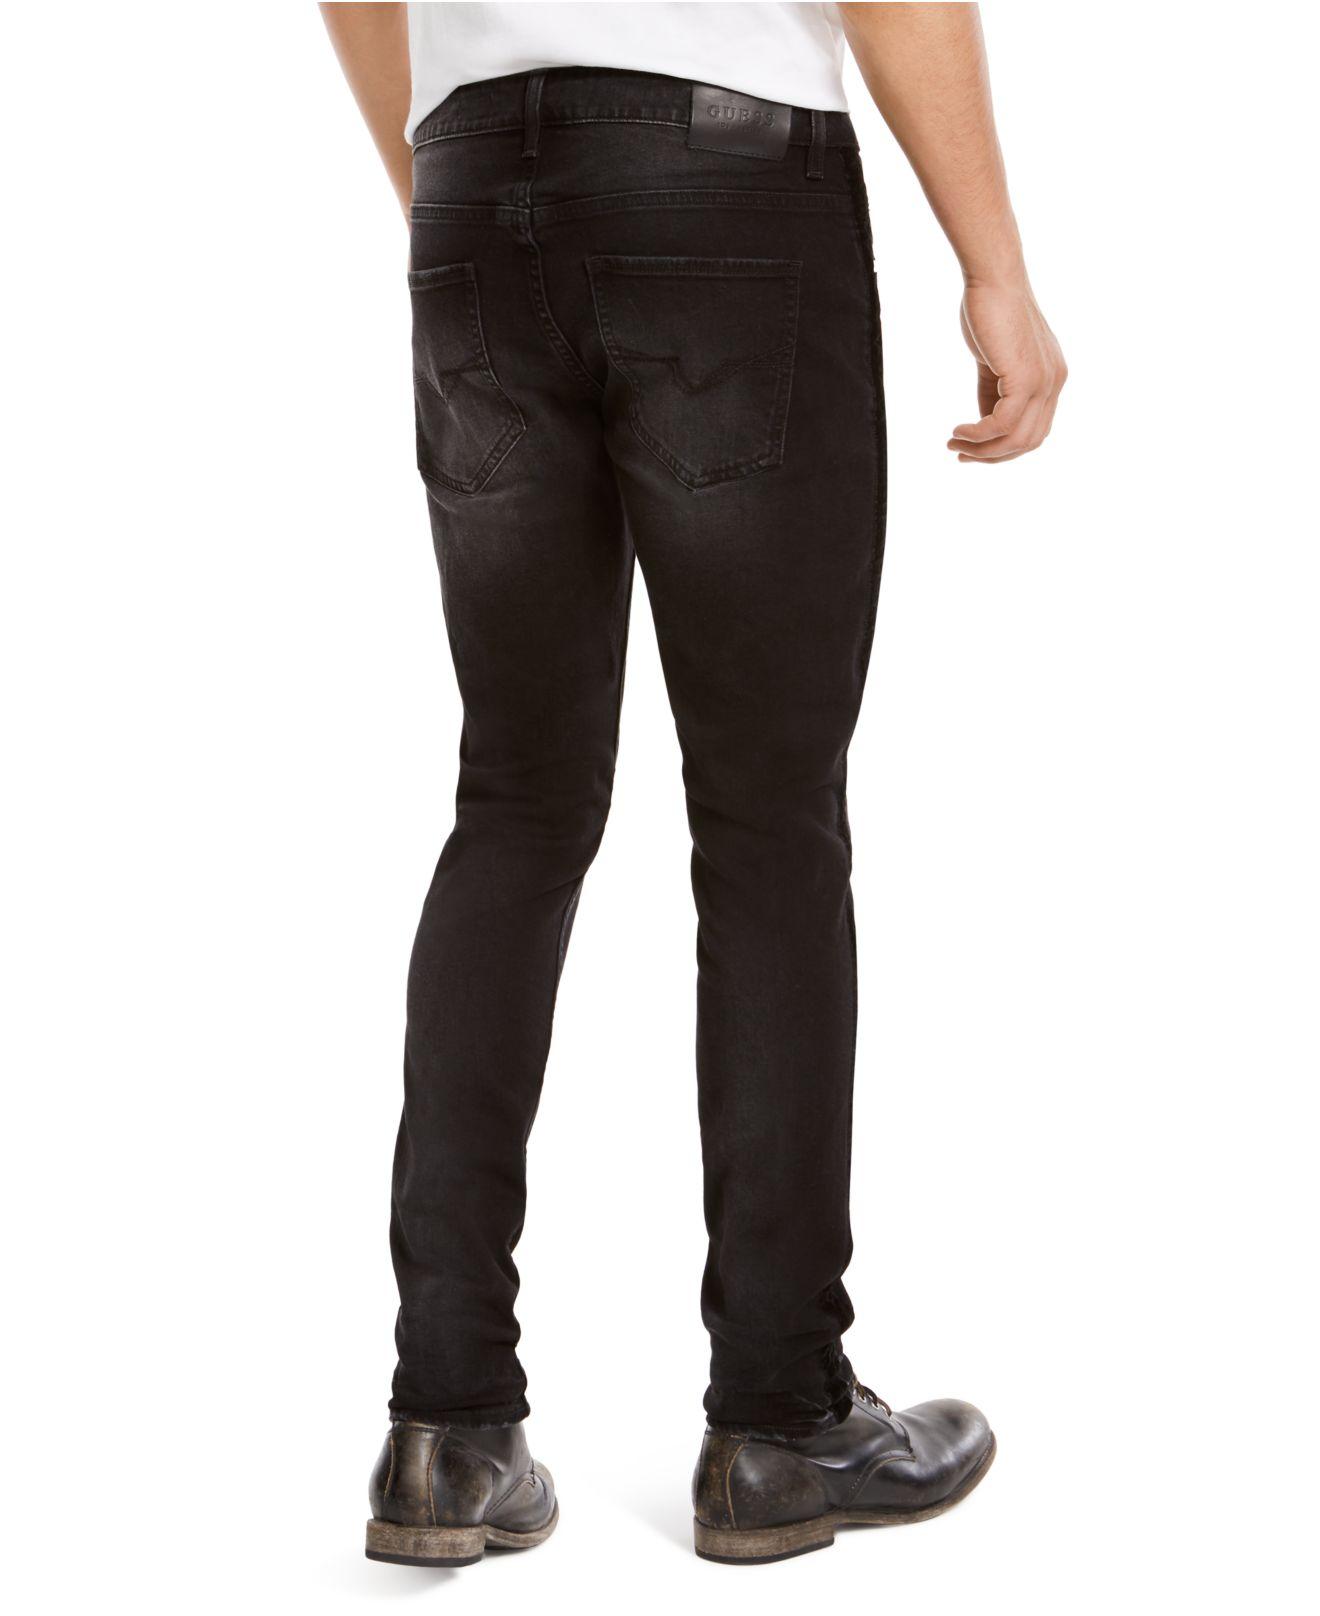 Guess Denim Skinny-fit Stretch Taped Destroyed Jeans in Gray for Men - Lyst